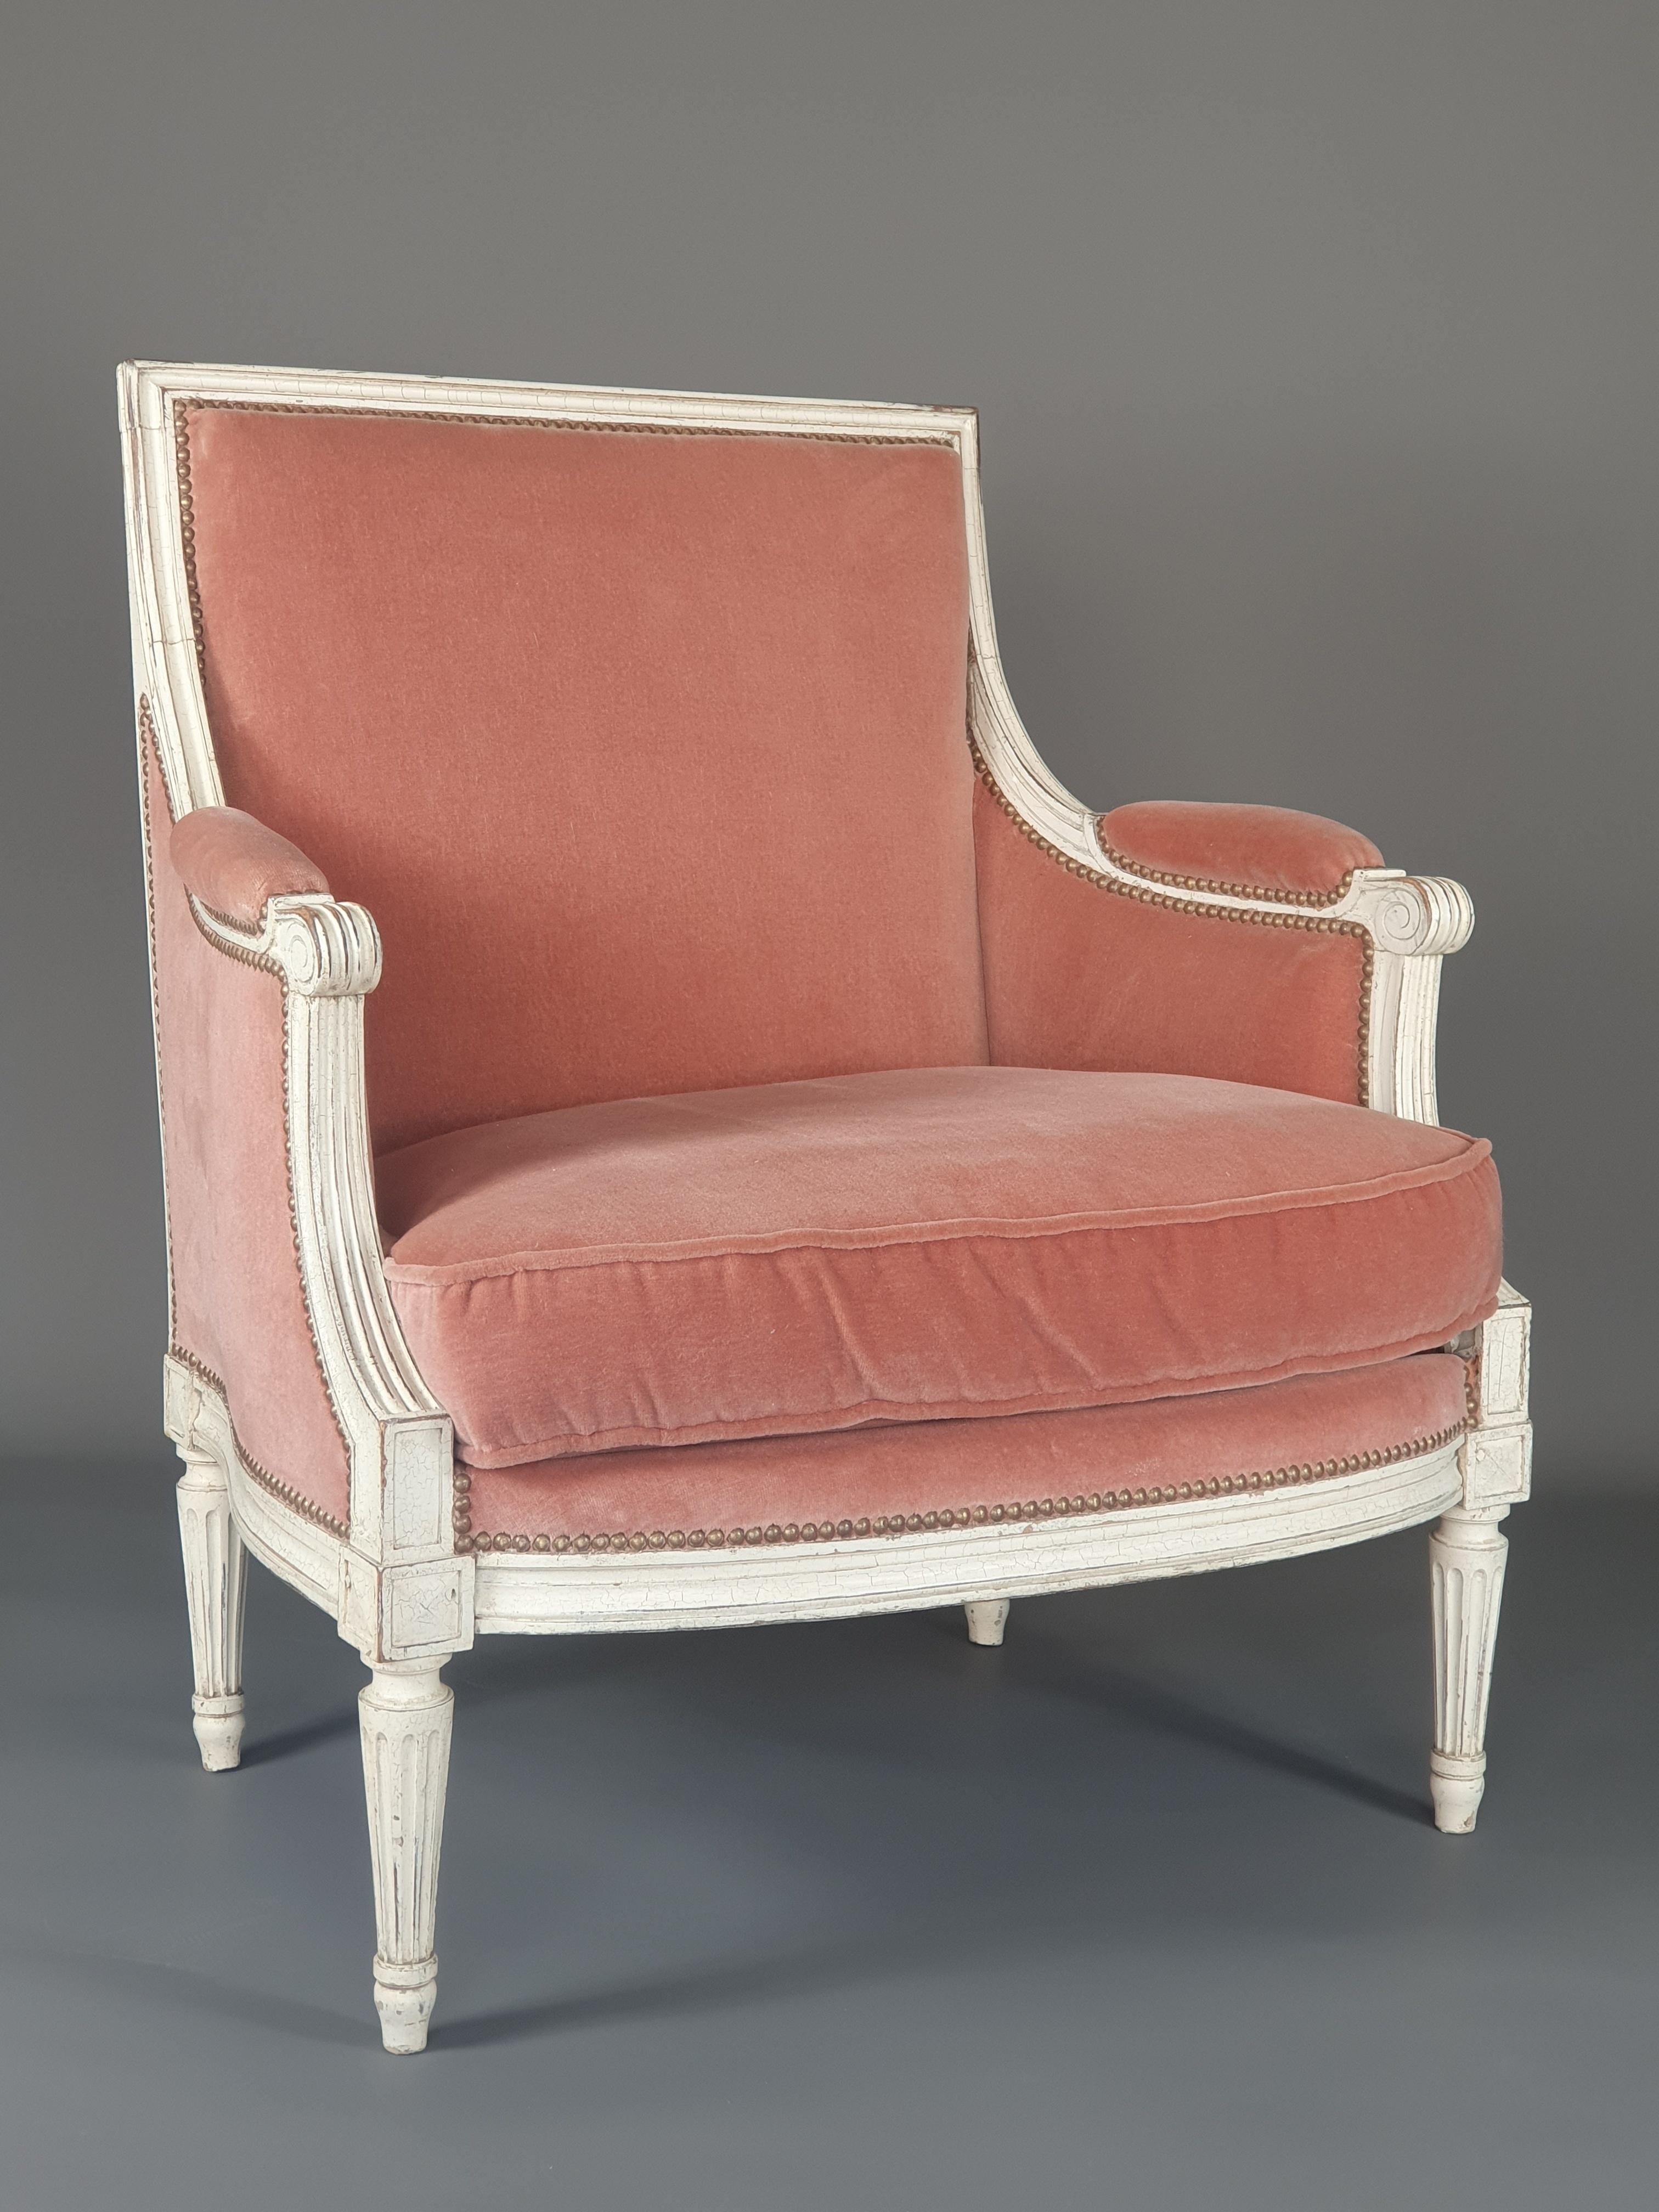 Beautiful Louis XVI marquise in white lacquered wood and old pink wool velvet upholstery.

Good quality, fully pegged seat, 19th century work.

Very good condition, some wear to the lacquer, fabric in perfect condition.